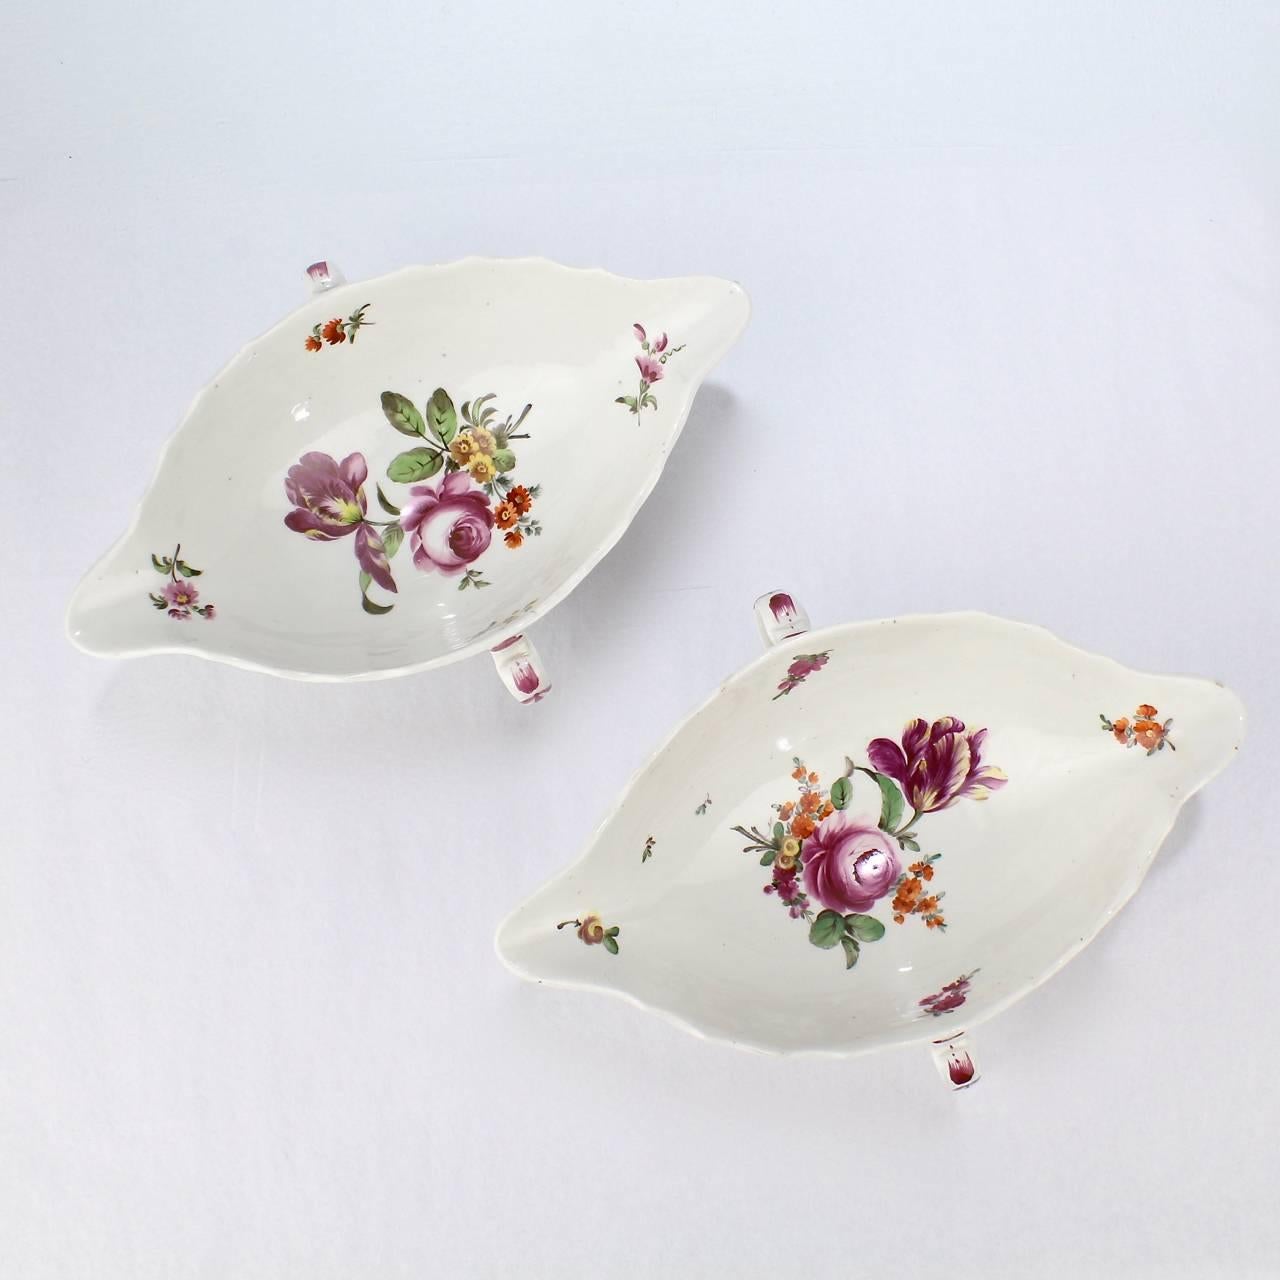 Pair of Antique 18th Century Imperial Vienna Porcelain Sauce or Gravy Boats In Good Condition For Sale In Philadelphia, PA